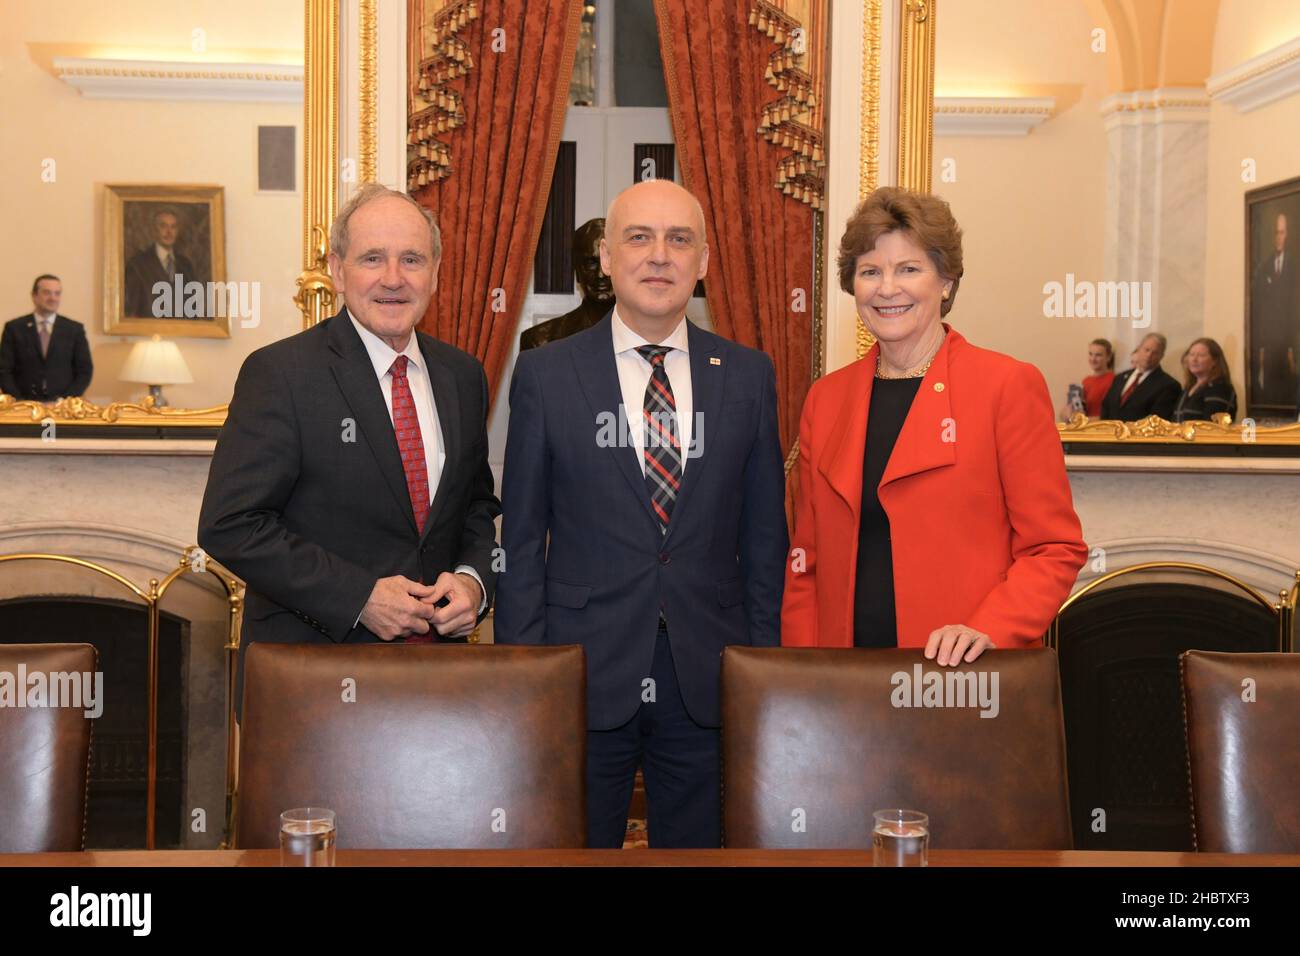 U.S. Senators Jim Risch (R-Idaho), chairman of the Senate Foreign Relations Committee, and Jeanne Shaheen (D-N.H.) meet with Mr. David Zalkaliani, foreign minister of Georgia ca.  4 February 2020 Stock Photo